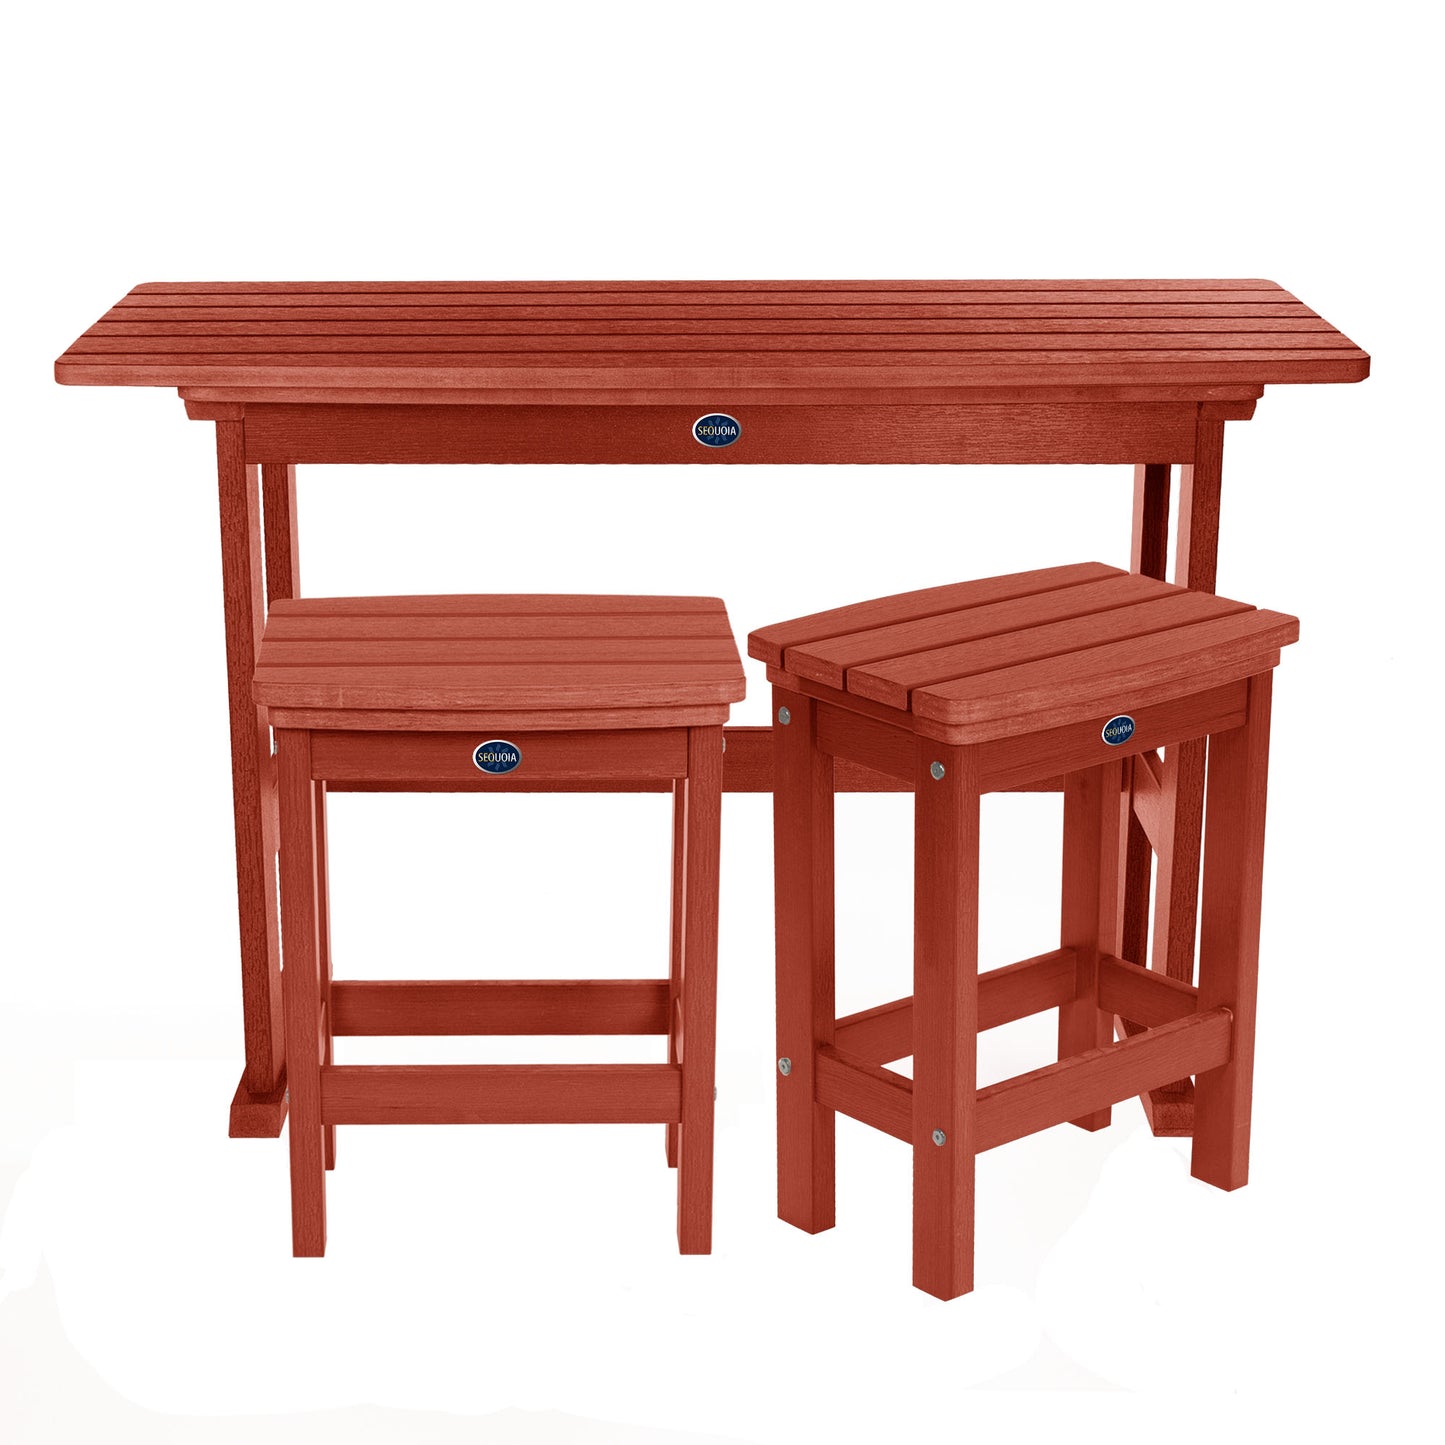 Blue Ridge 3 piece counter height balcony set in Rustic Red